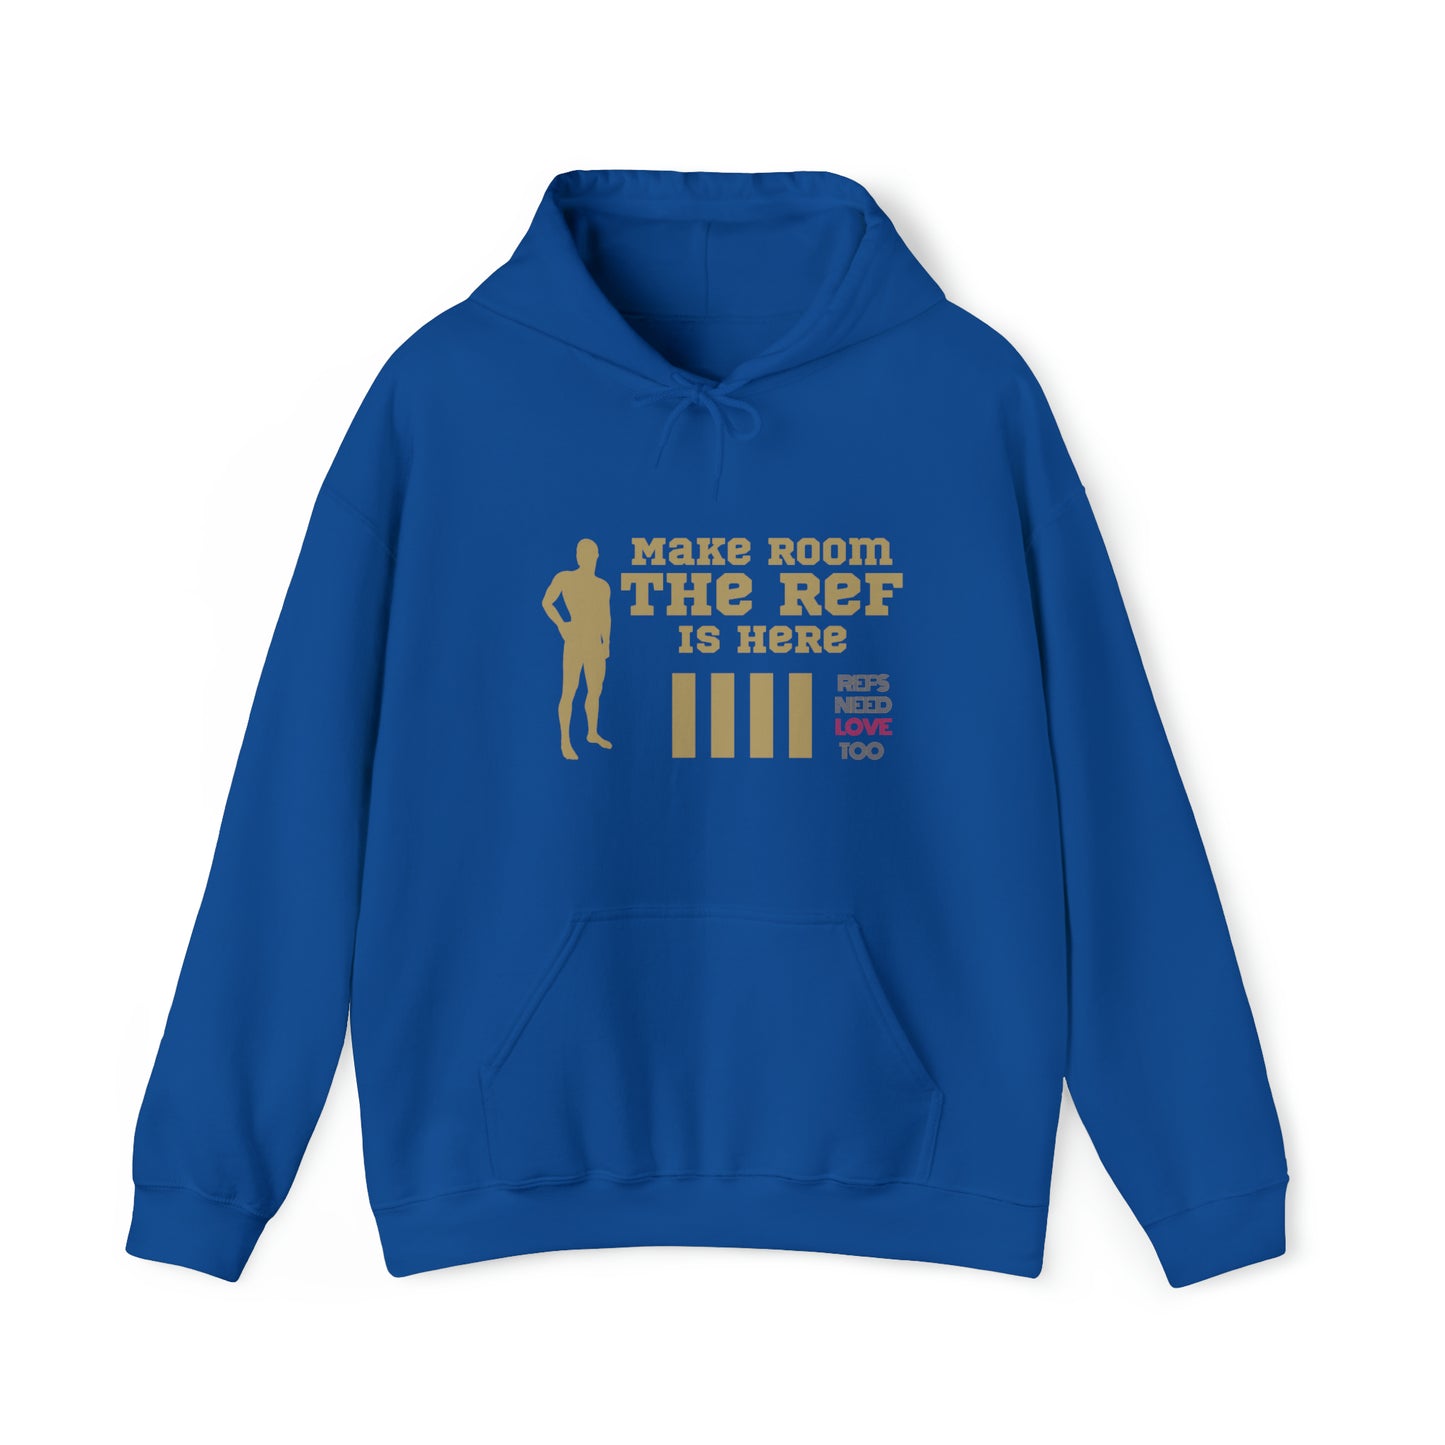 The Ref is Here Unisex Heavy Blend™ Hooded Sweatshirt | For referees | Great gifts for sports officials | Funny sweatshirt